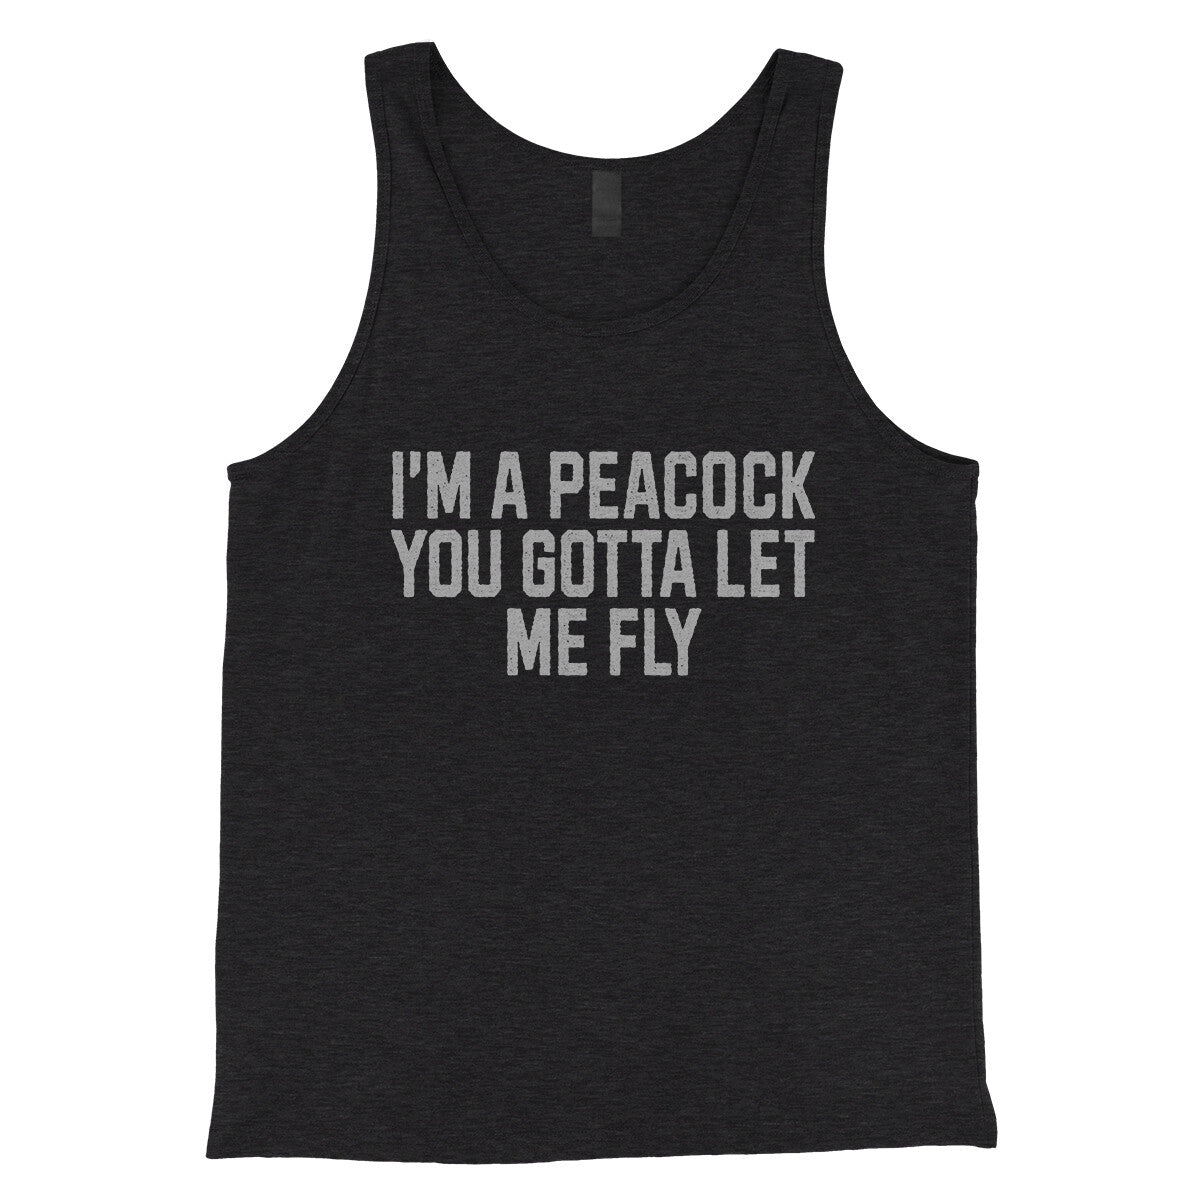 I'm a Peacock You Gotta Let me Fly in Charcoal Black TriBlend Color